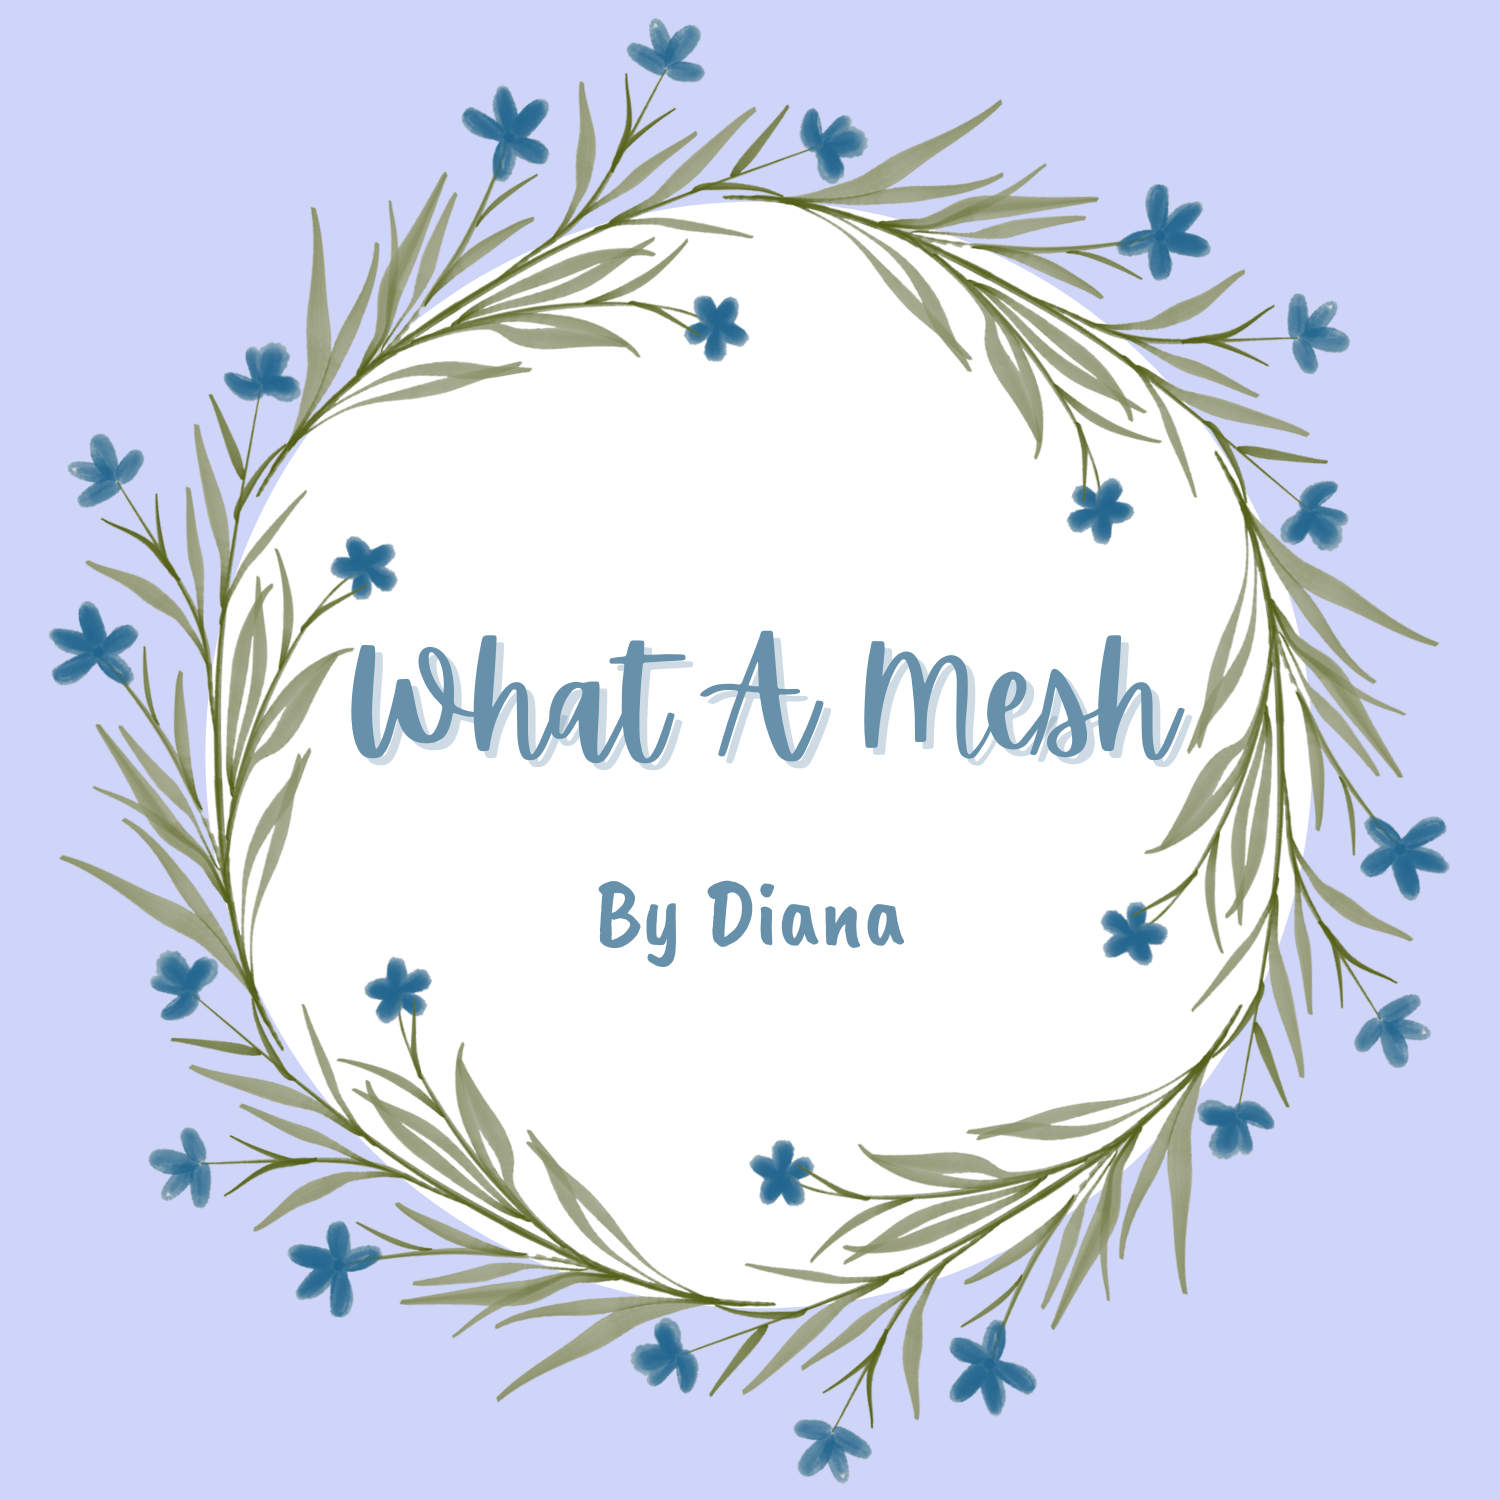 What a Mesh By Diana